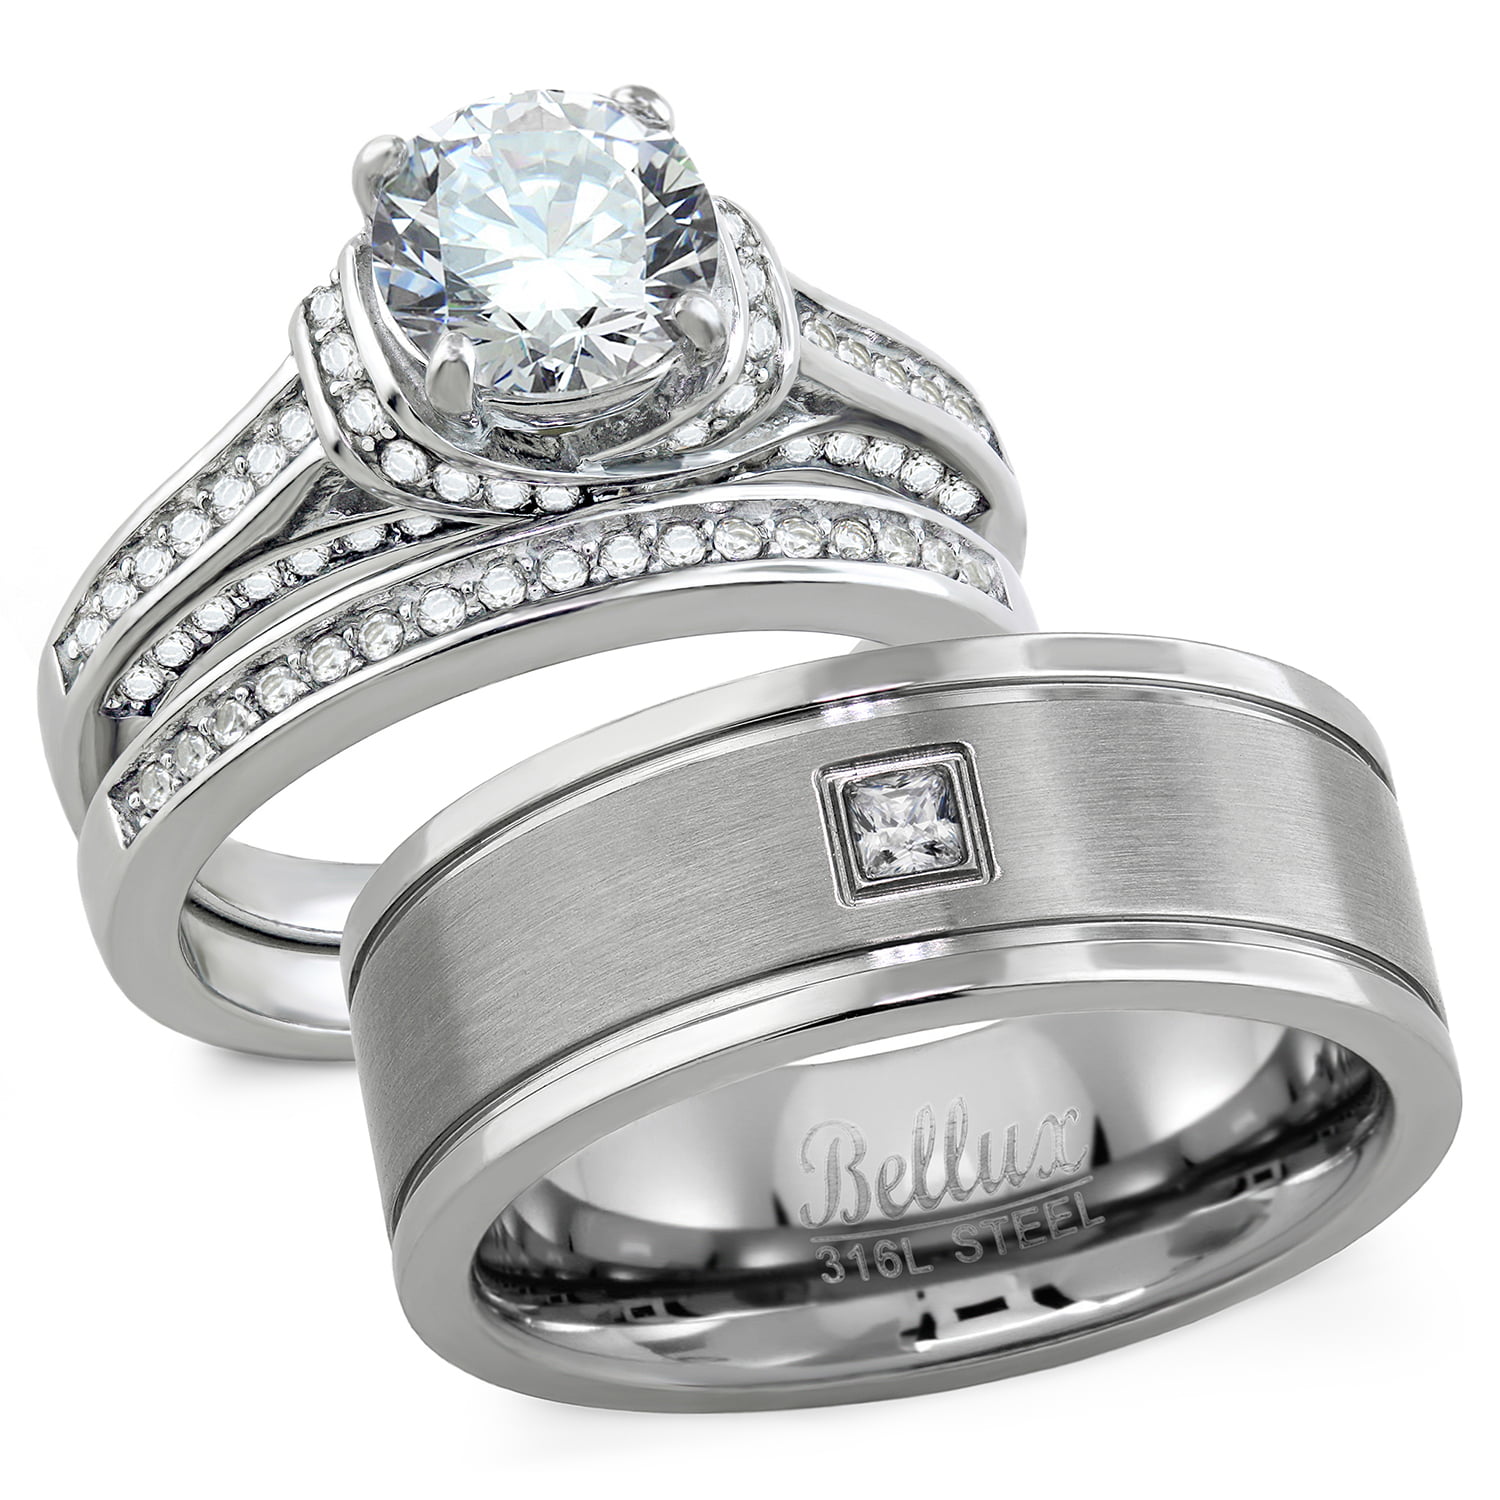 Bridal Stainless Steel Polished & Textured CZ Ring